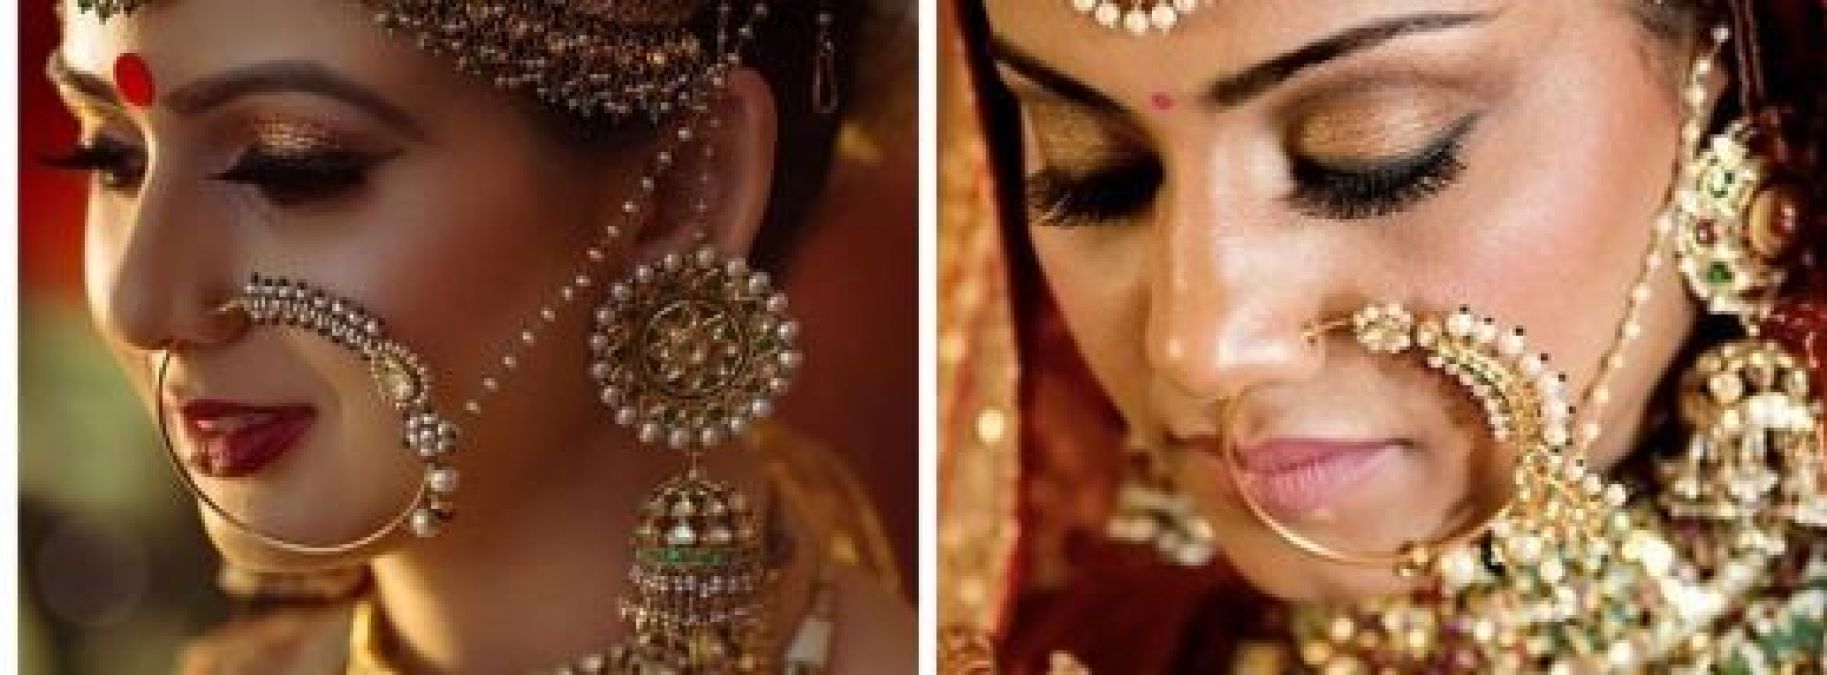 If you are going to wear it at the wedding, then follow these tips